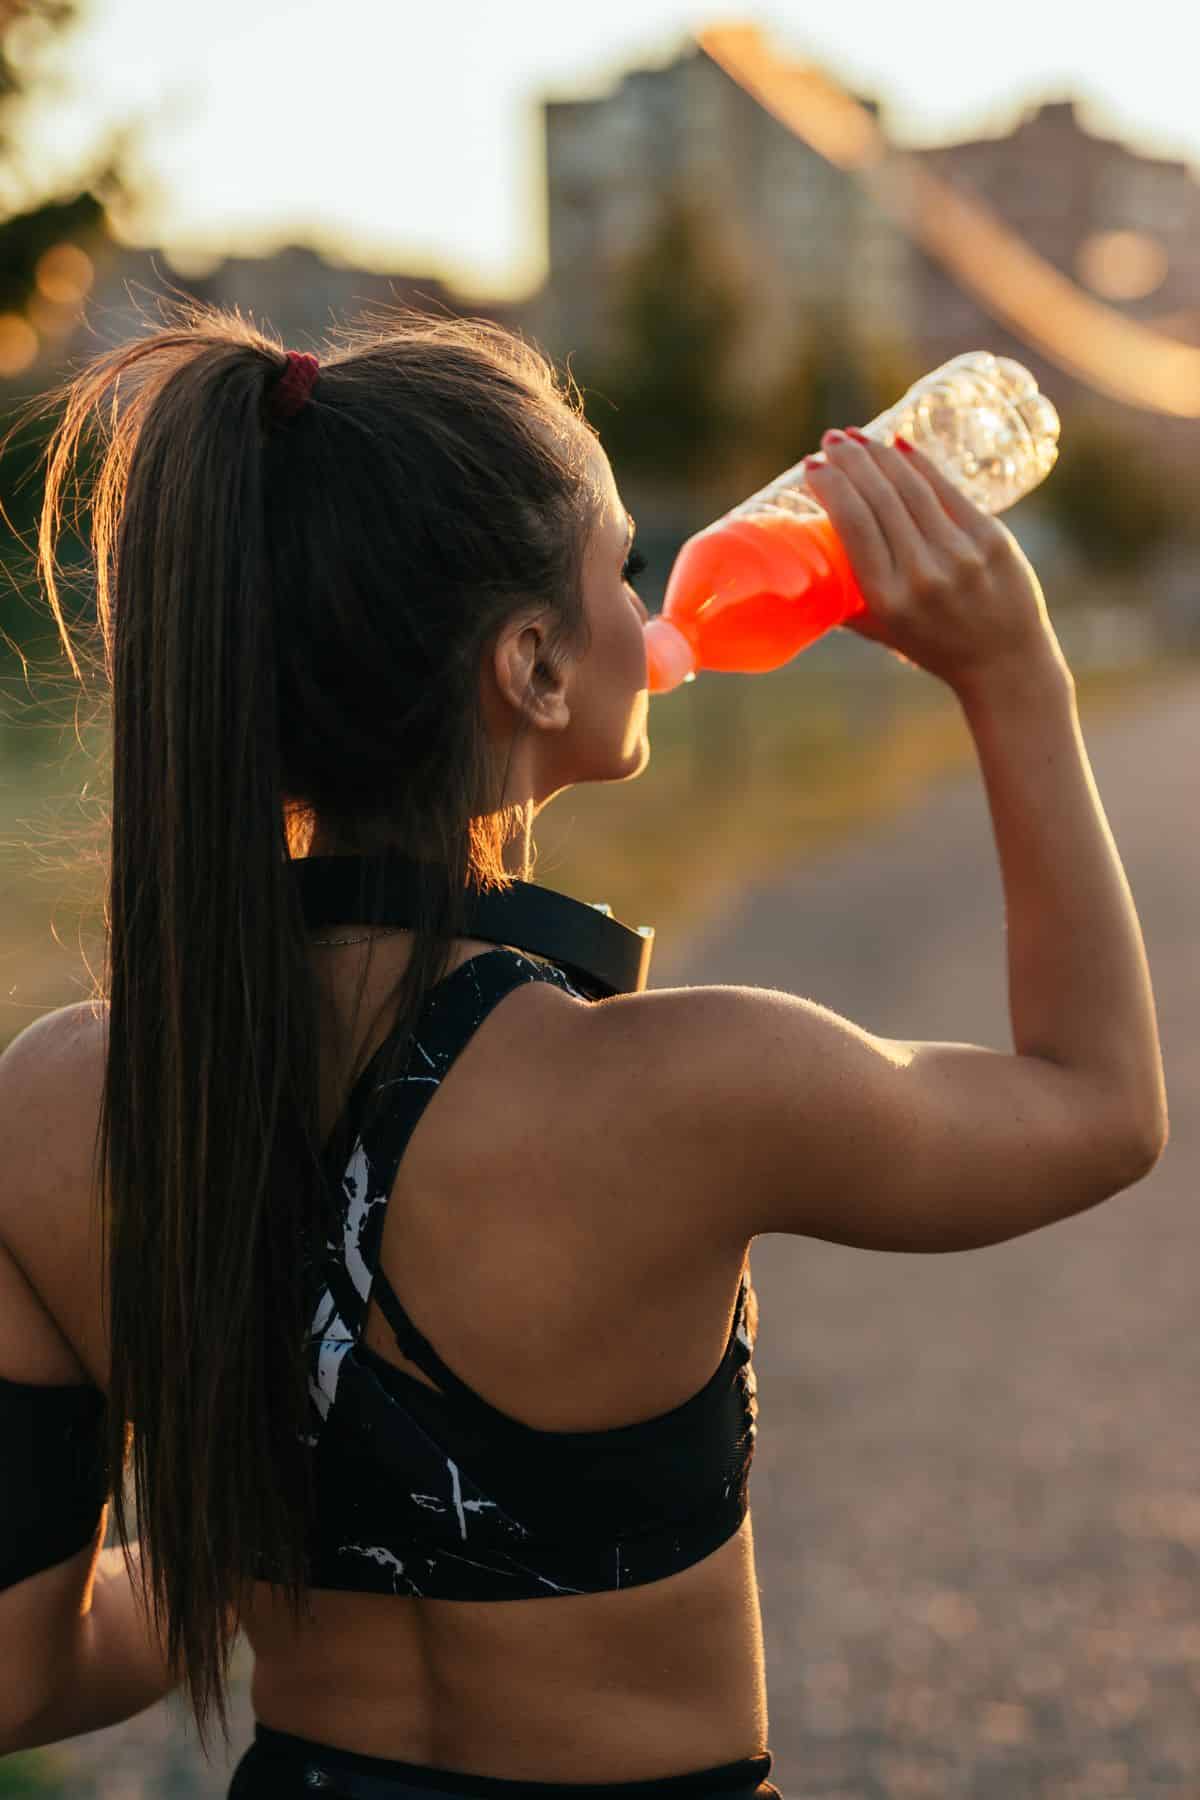 a woman drinking a sports drink.